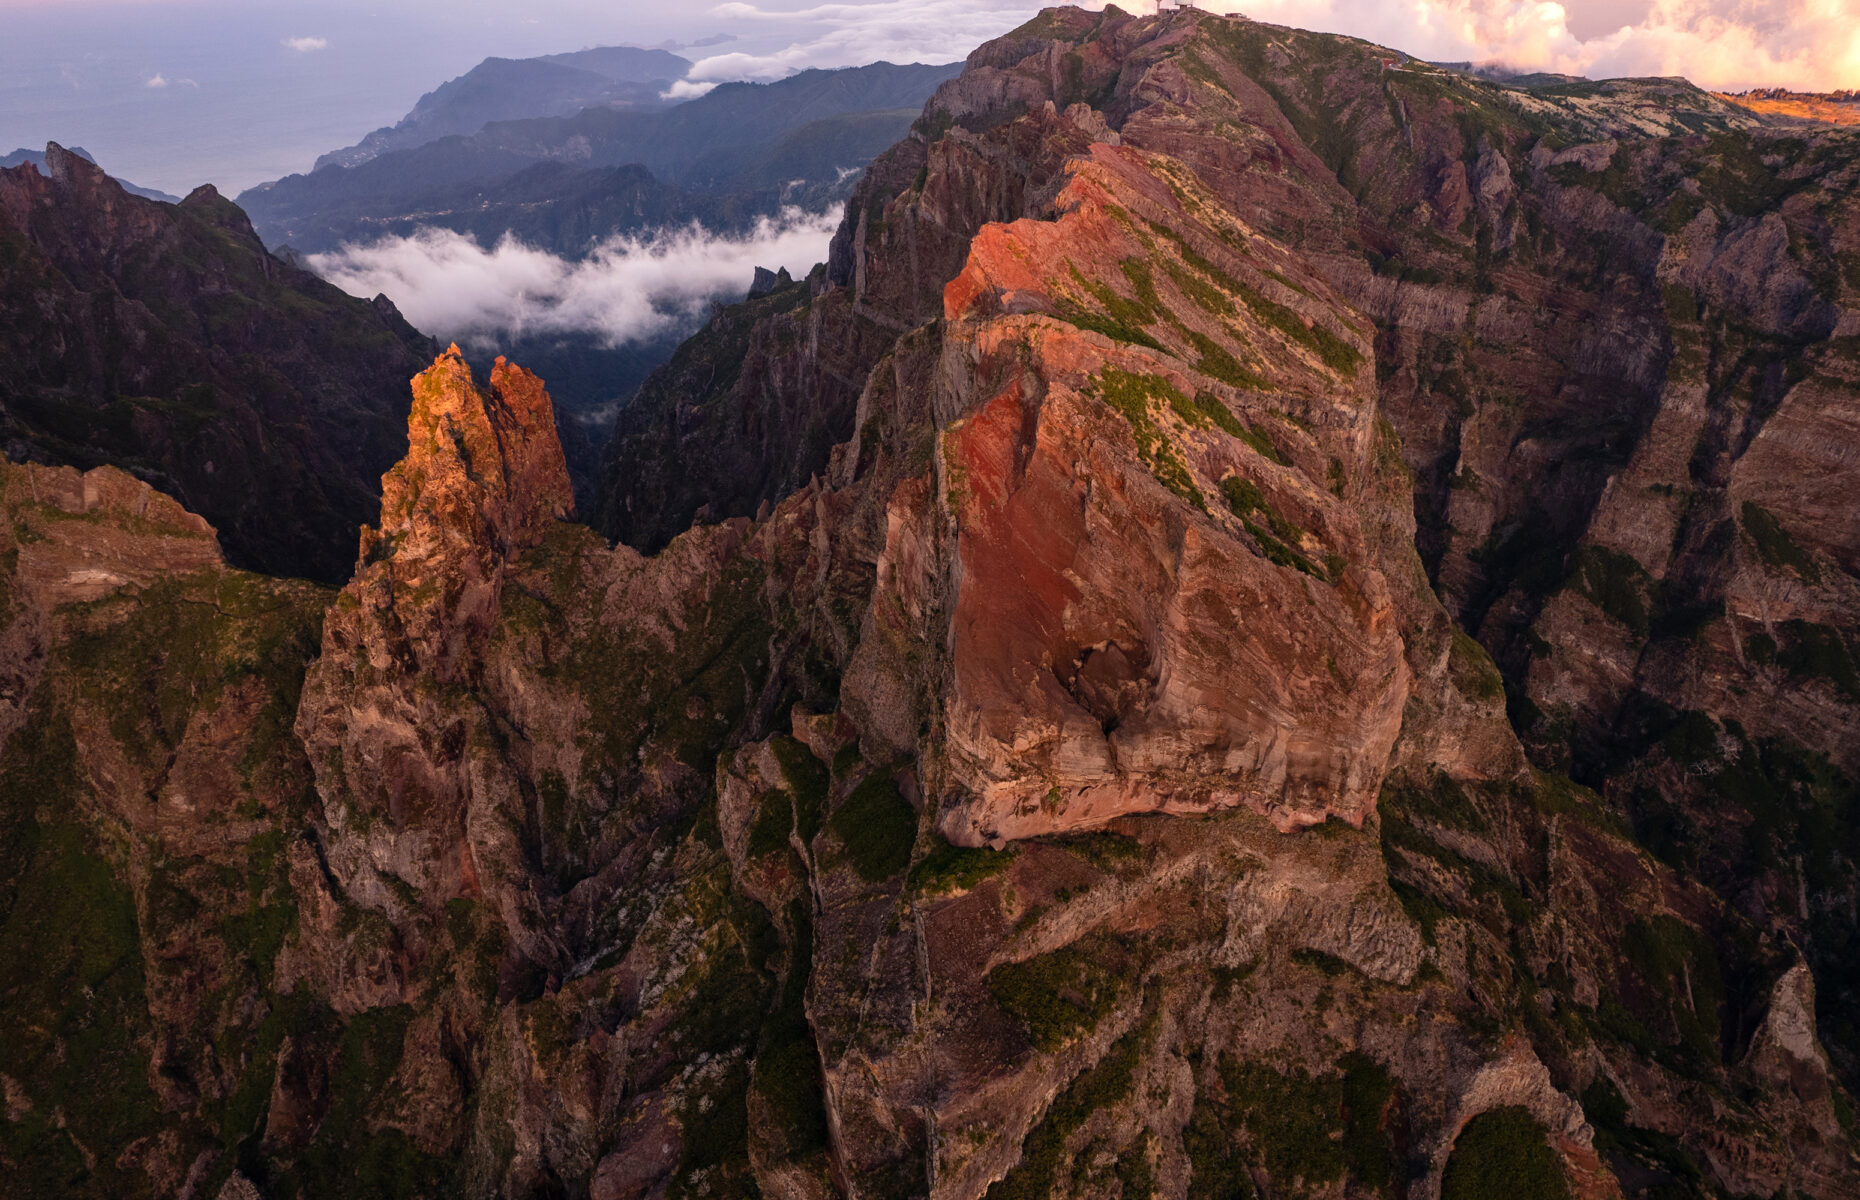 Breathtaking drone view of rocky mountains located against cloudy sky at sundown in highland of Madeira, Portugal